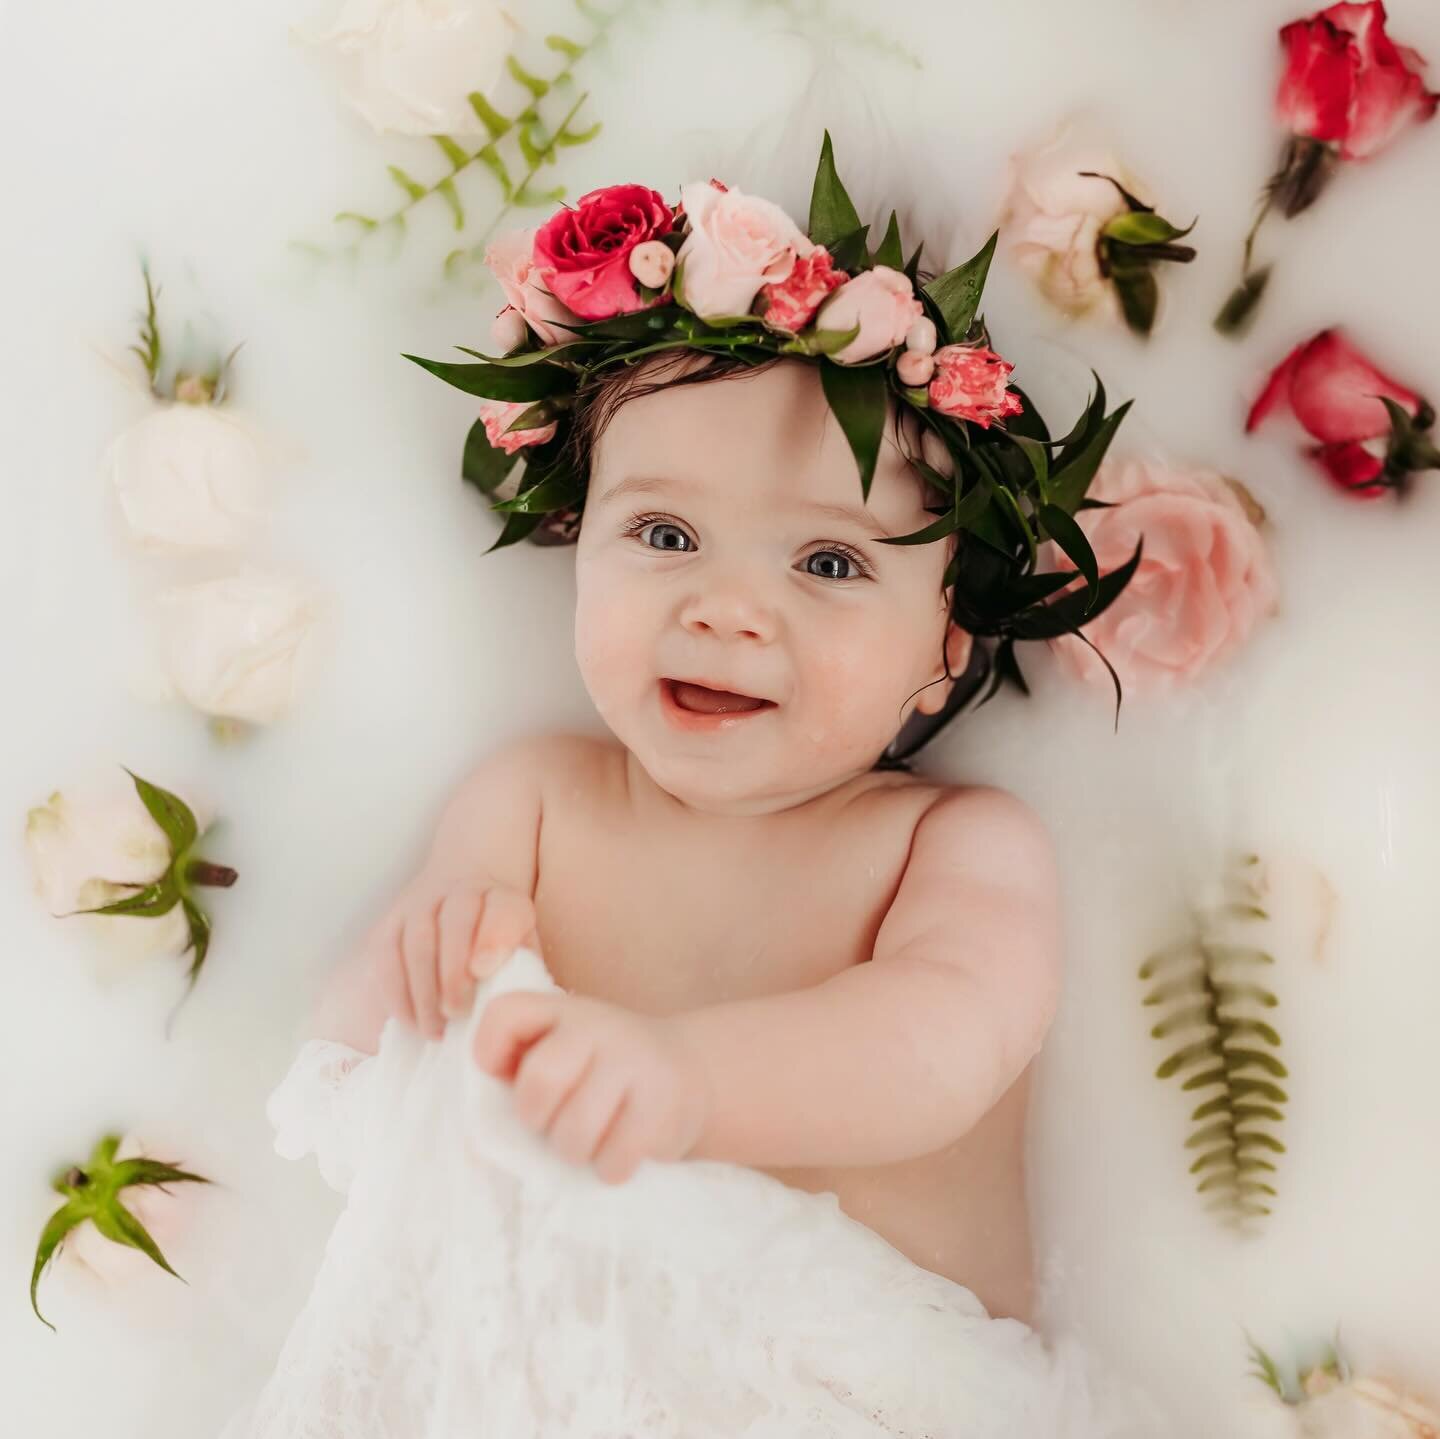 Gah!! I just love this little sweetie! And she loved her milk bath session. Baby Addy | 9M

#milkbath #milkbathsession #9msession #theplantcollective #flowercrowns